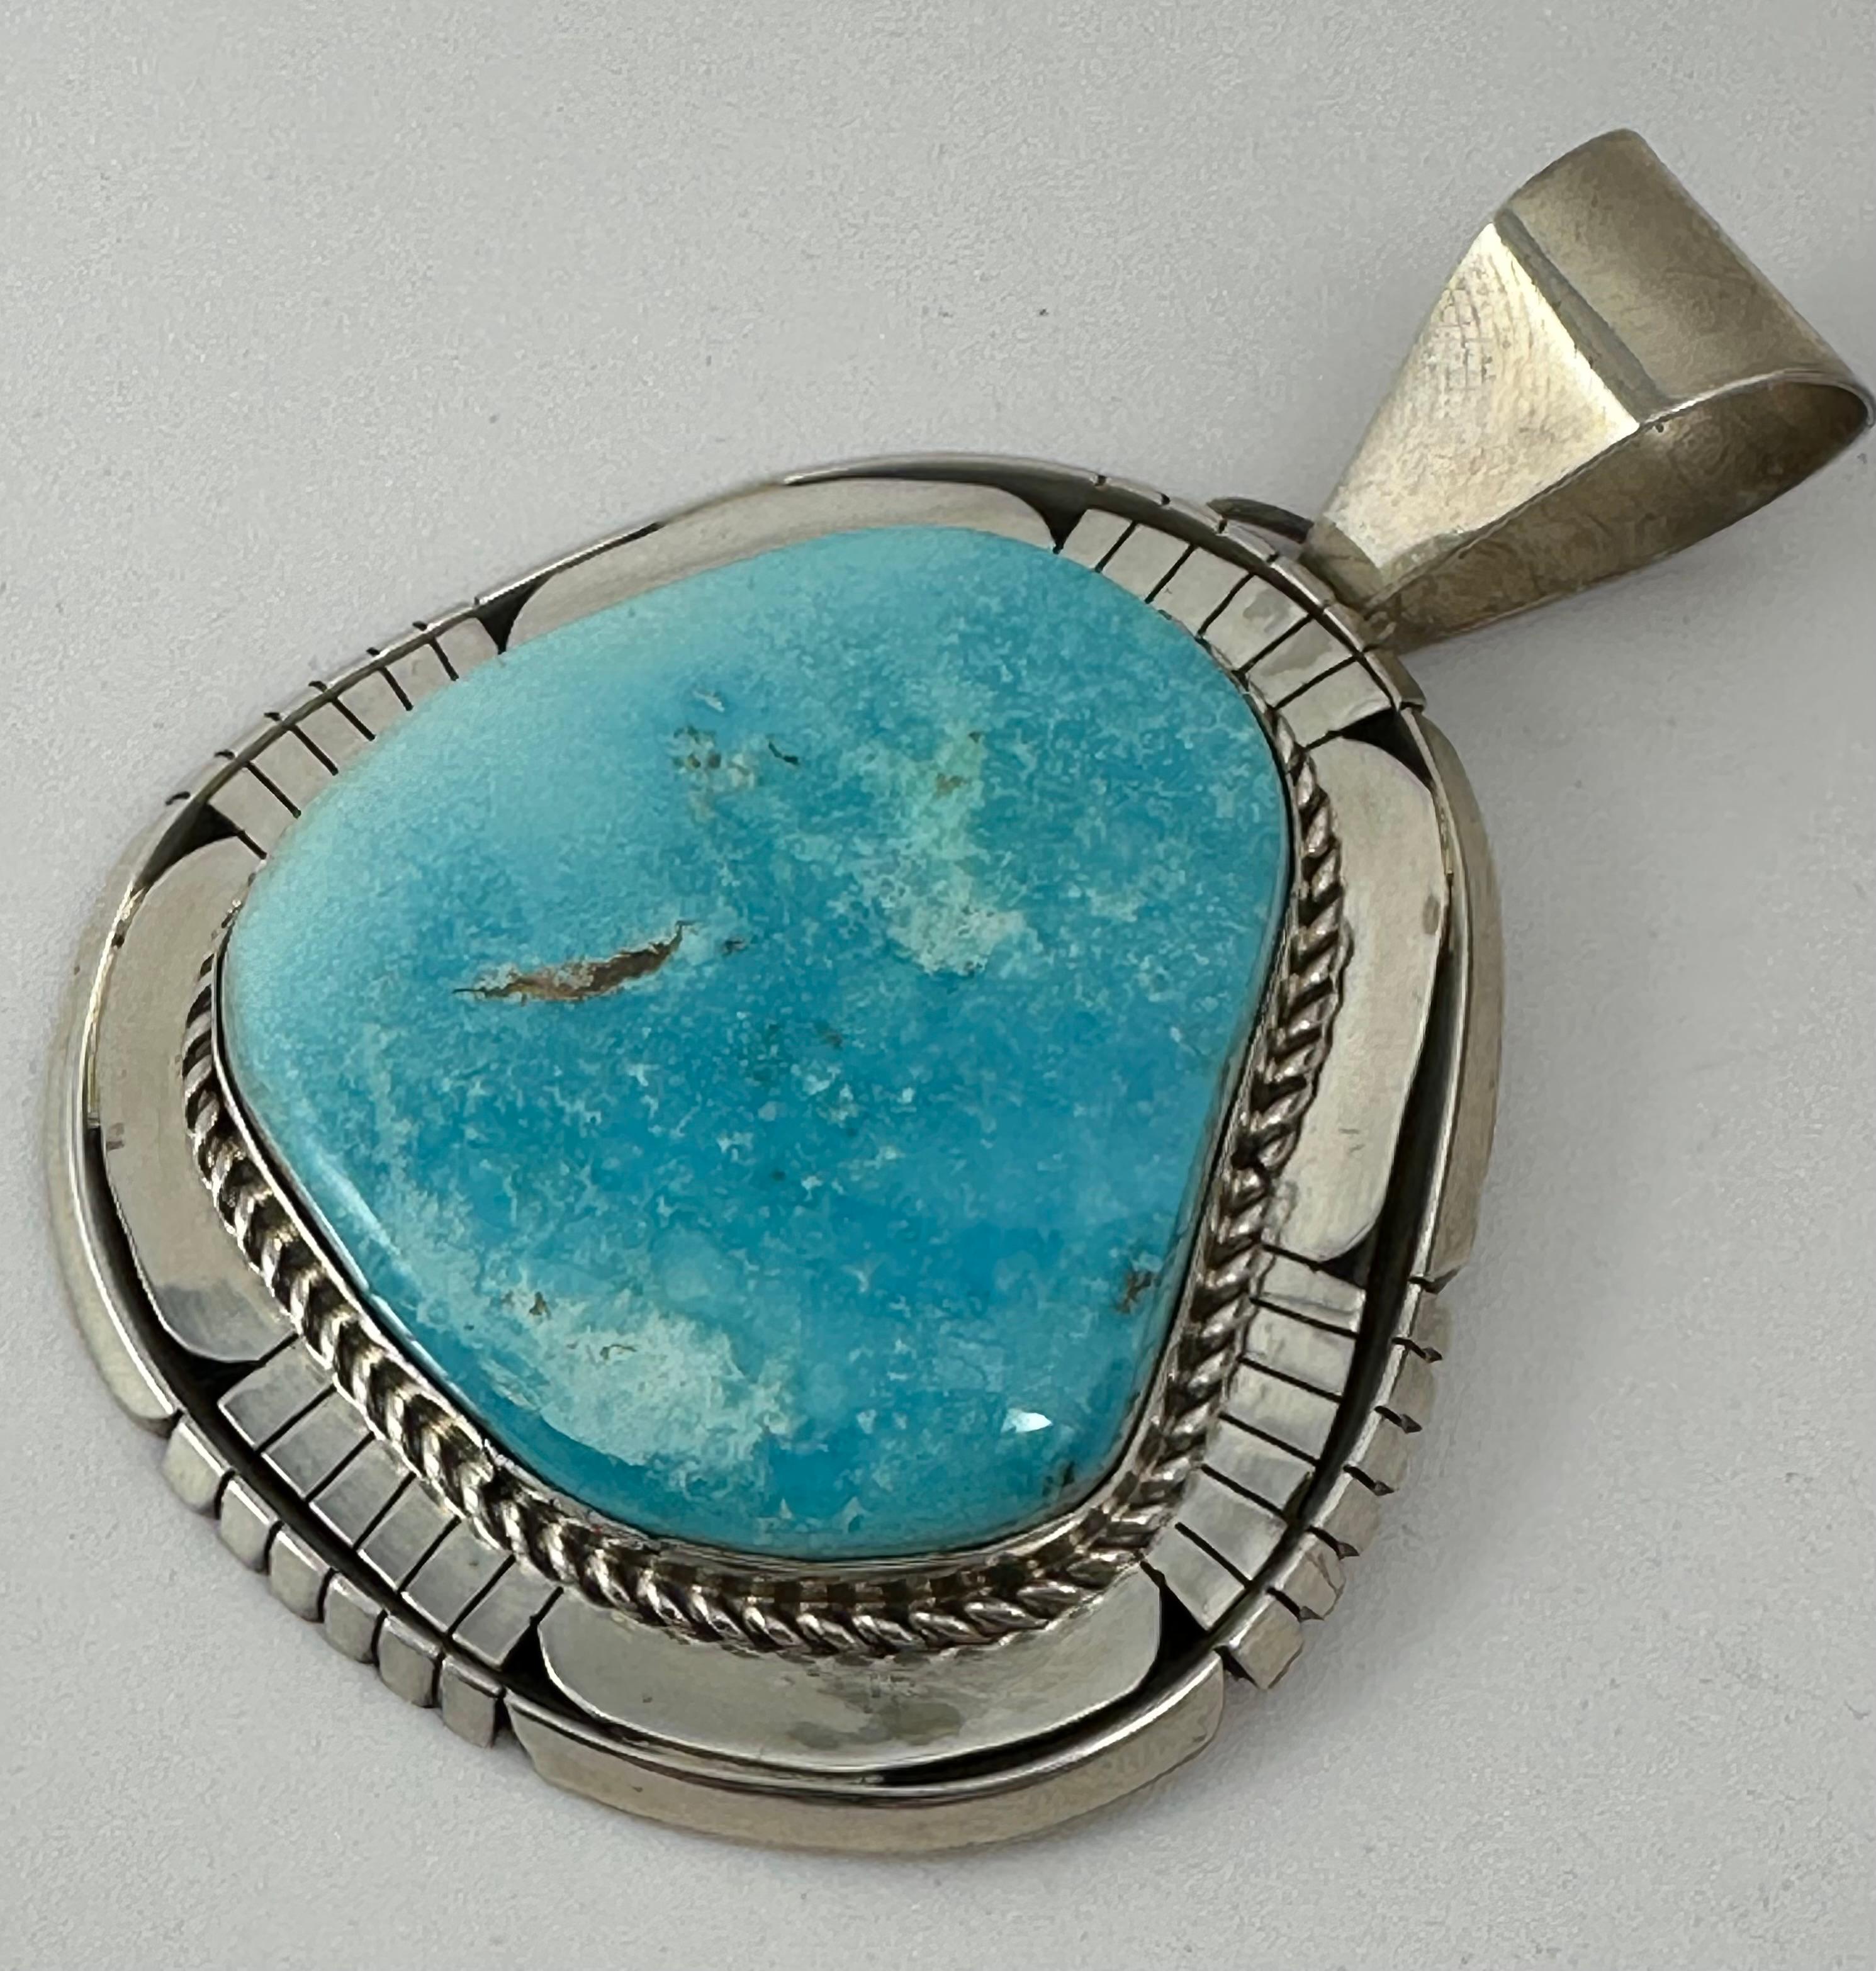 Artisan Sterling Silver Sleeping Beauty Turquoise Pendant by Navajo Artist Betta Lee For Sale